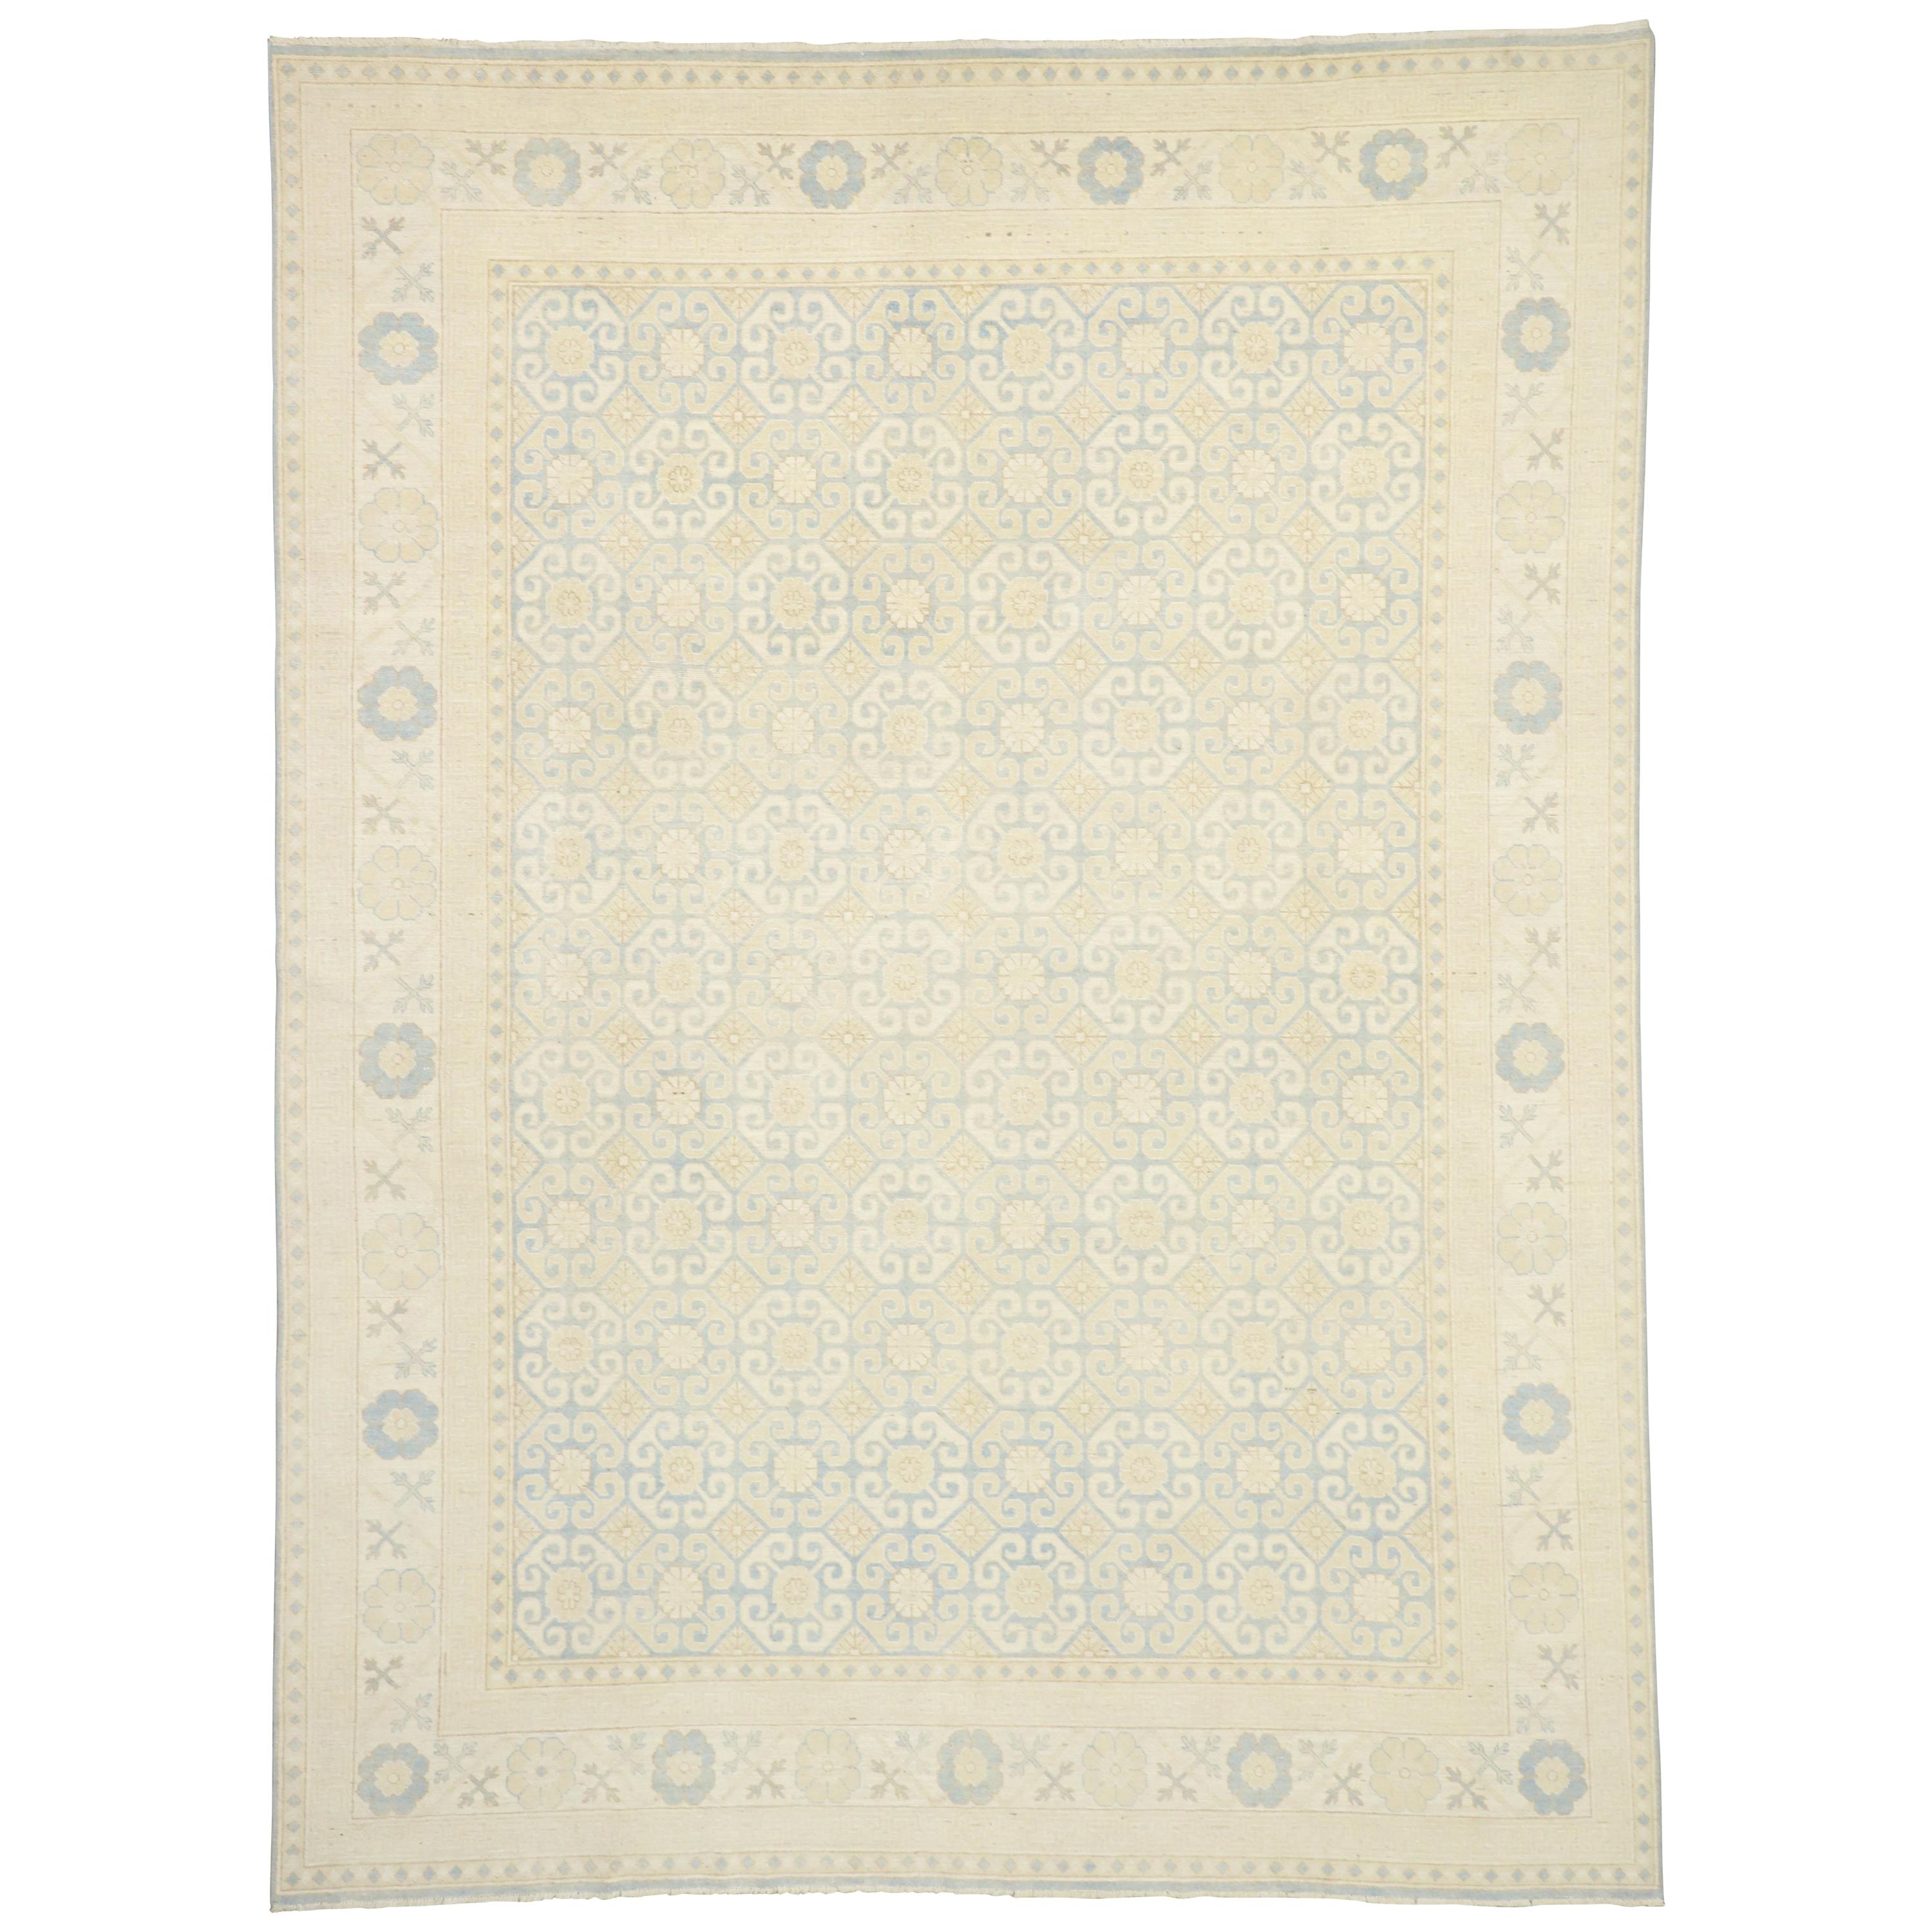 New Transitional Khotan Area Rug with Hamptons Chic Style, Cozy Cottage Vibes For Sale